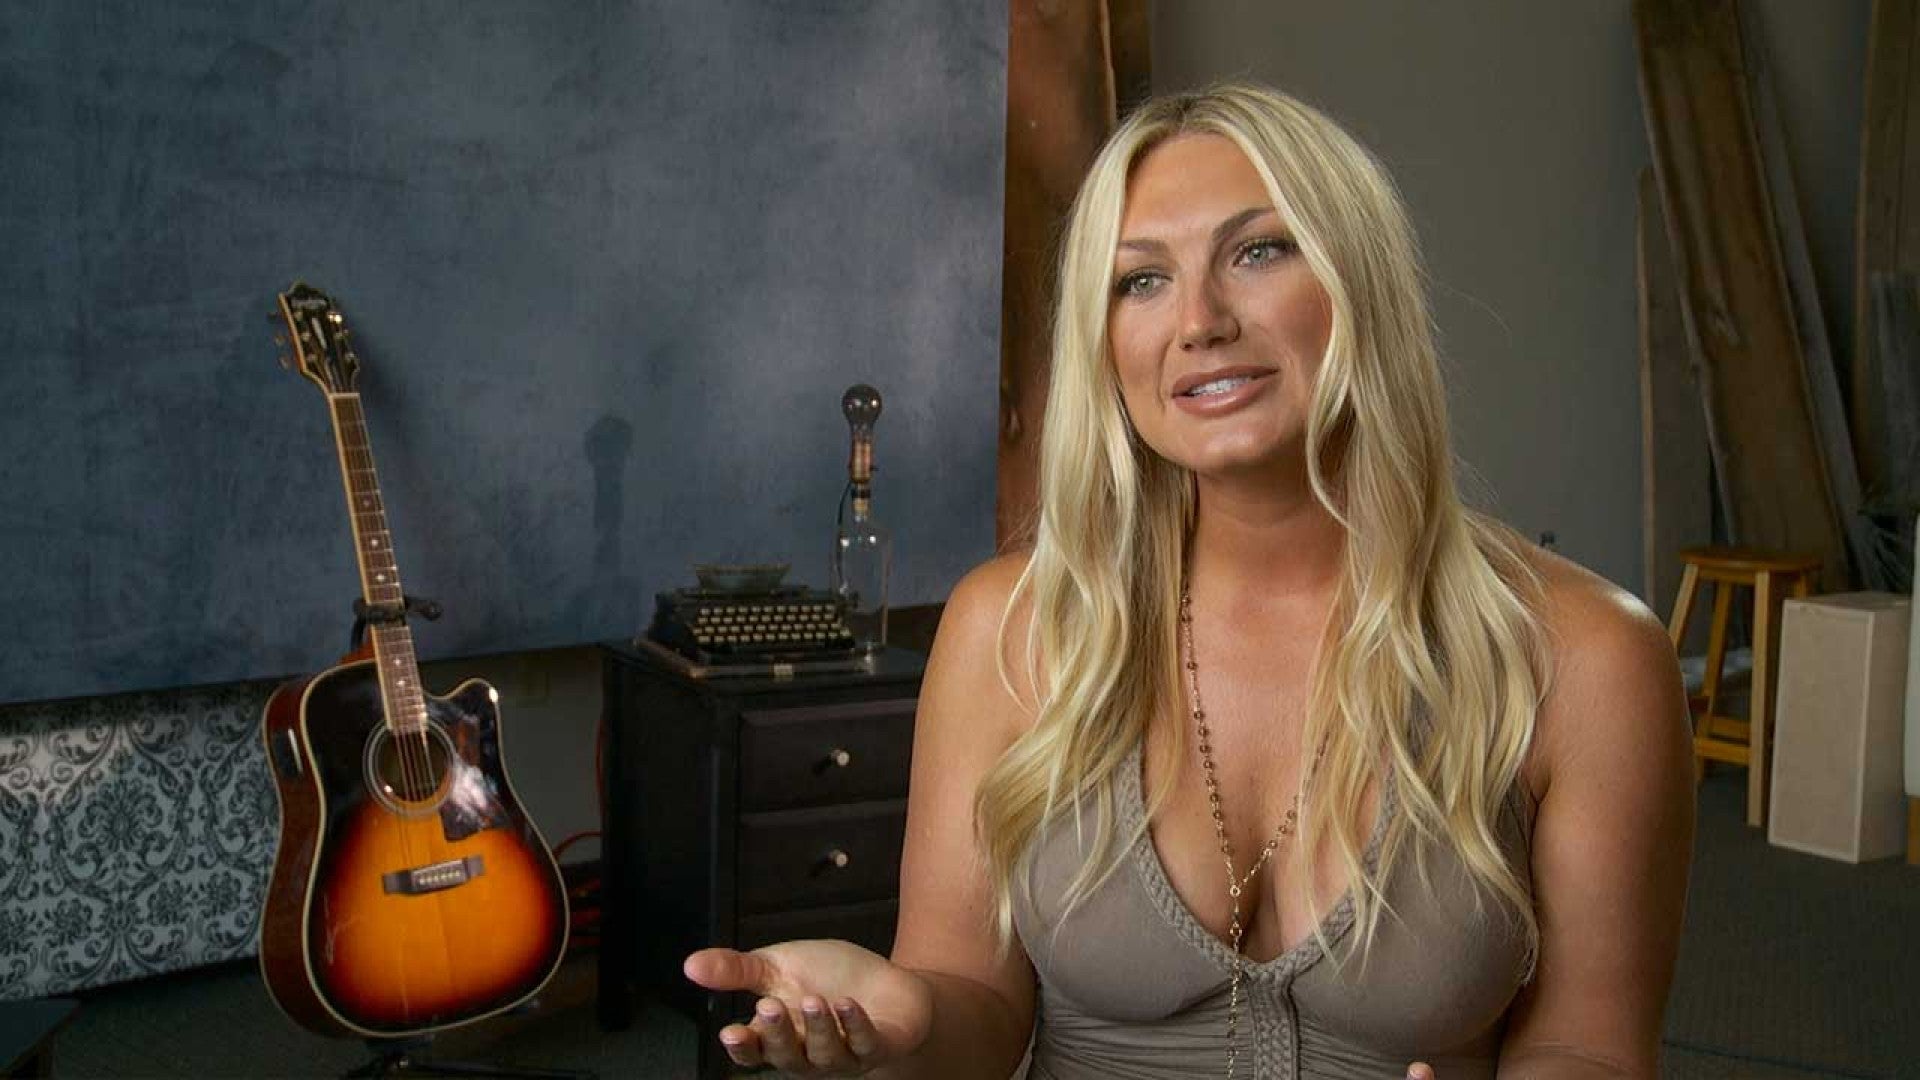 EXCLUSIVE Brooke Hogan Defends Her Dad Hulk Hogans Racist Rant Its Not Who He Really Is Entertainment Tonight